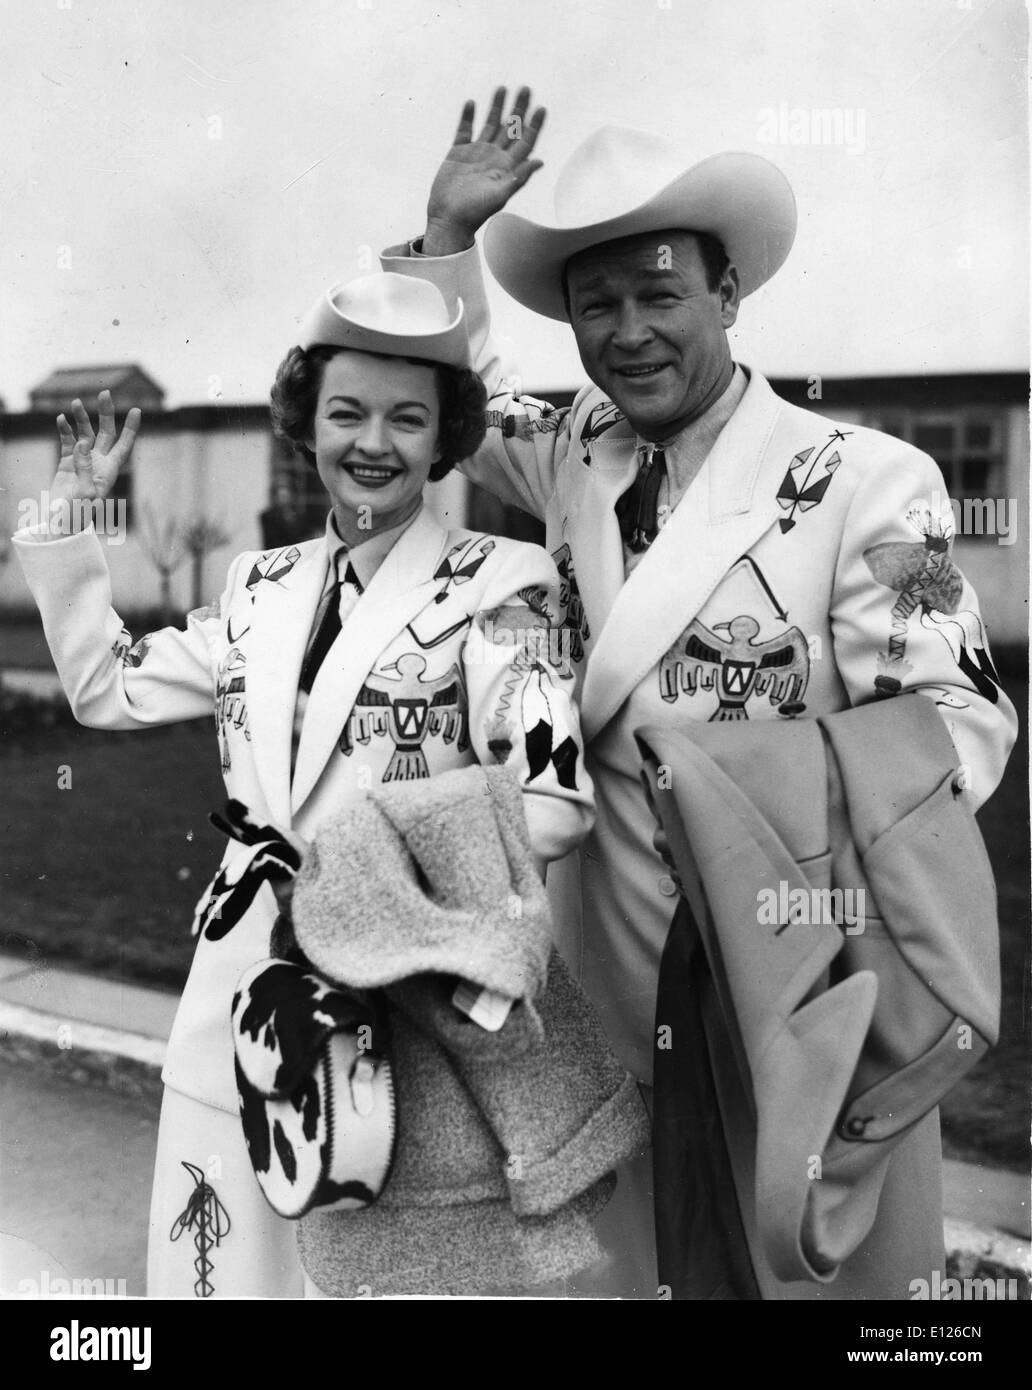 Jan 02, 2007; Los Angeles, CA, USA; LEONARD FRANKLIN SLYE aka ROY ROGERS (November 5, 1911 Ð July 6, 1998), who became famous as Roy Rogers, was a singer and cowboy actor. He and his third wife DALE EVANS, his golden palomino Trigger, and his German shepherd Bullet were featured in over one hundred movies and The Roy Rogers Show which ran on radio for nine years before moving to television from 1951 through 1964. His productions usually featured two sidekicks, Pat Brady (who drove a jeep called 'Nellybelle') and the crotchety bushwhacker Gabby Hayes. Roy's nickname was 'King of the Cowboys' Stock Photo